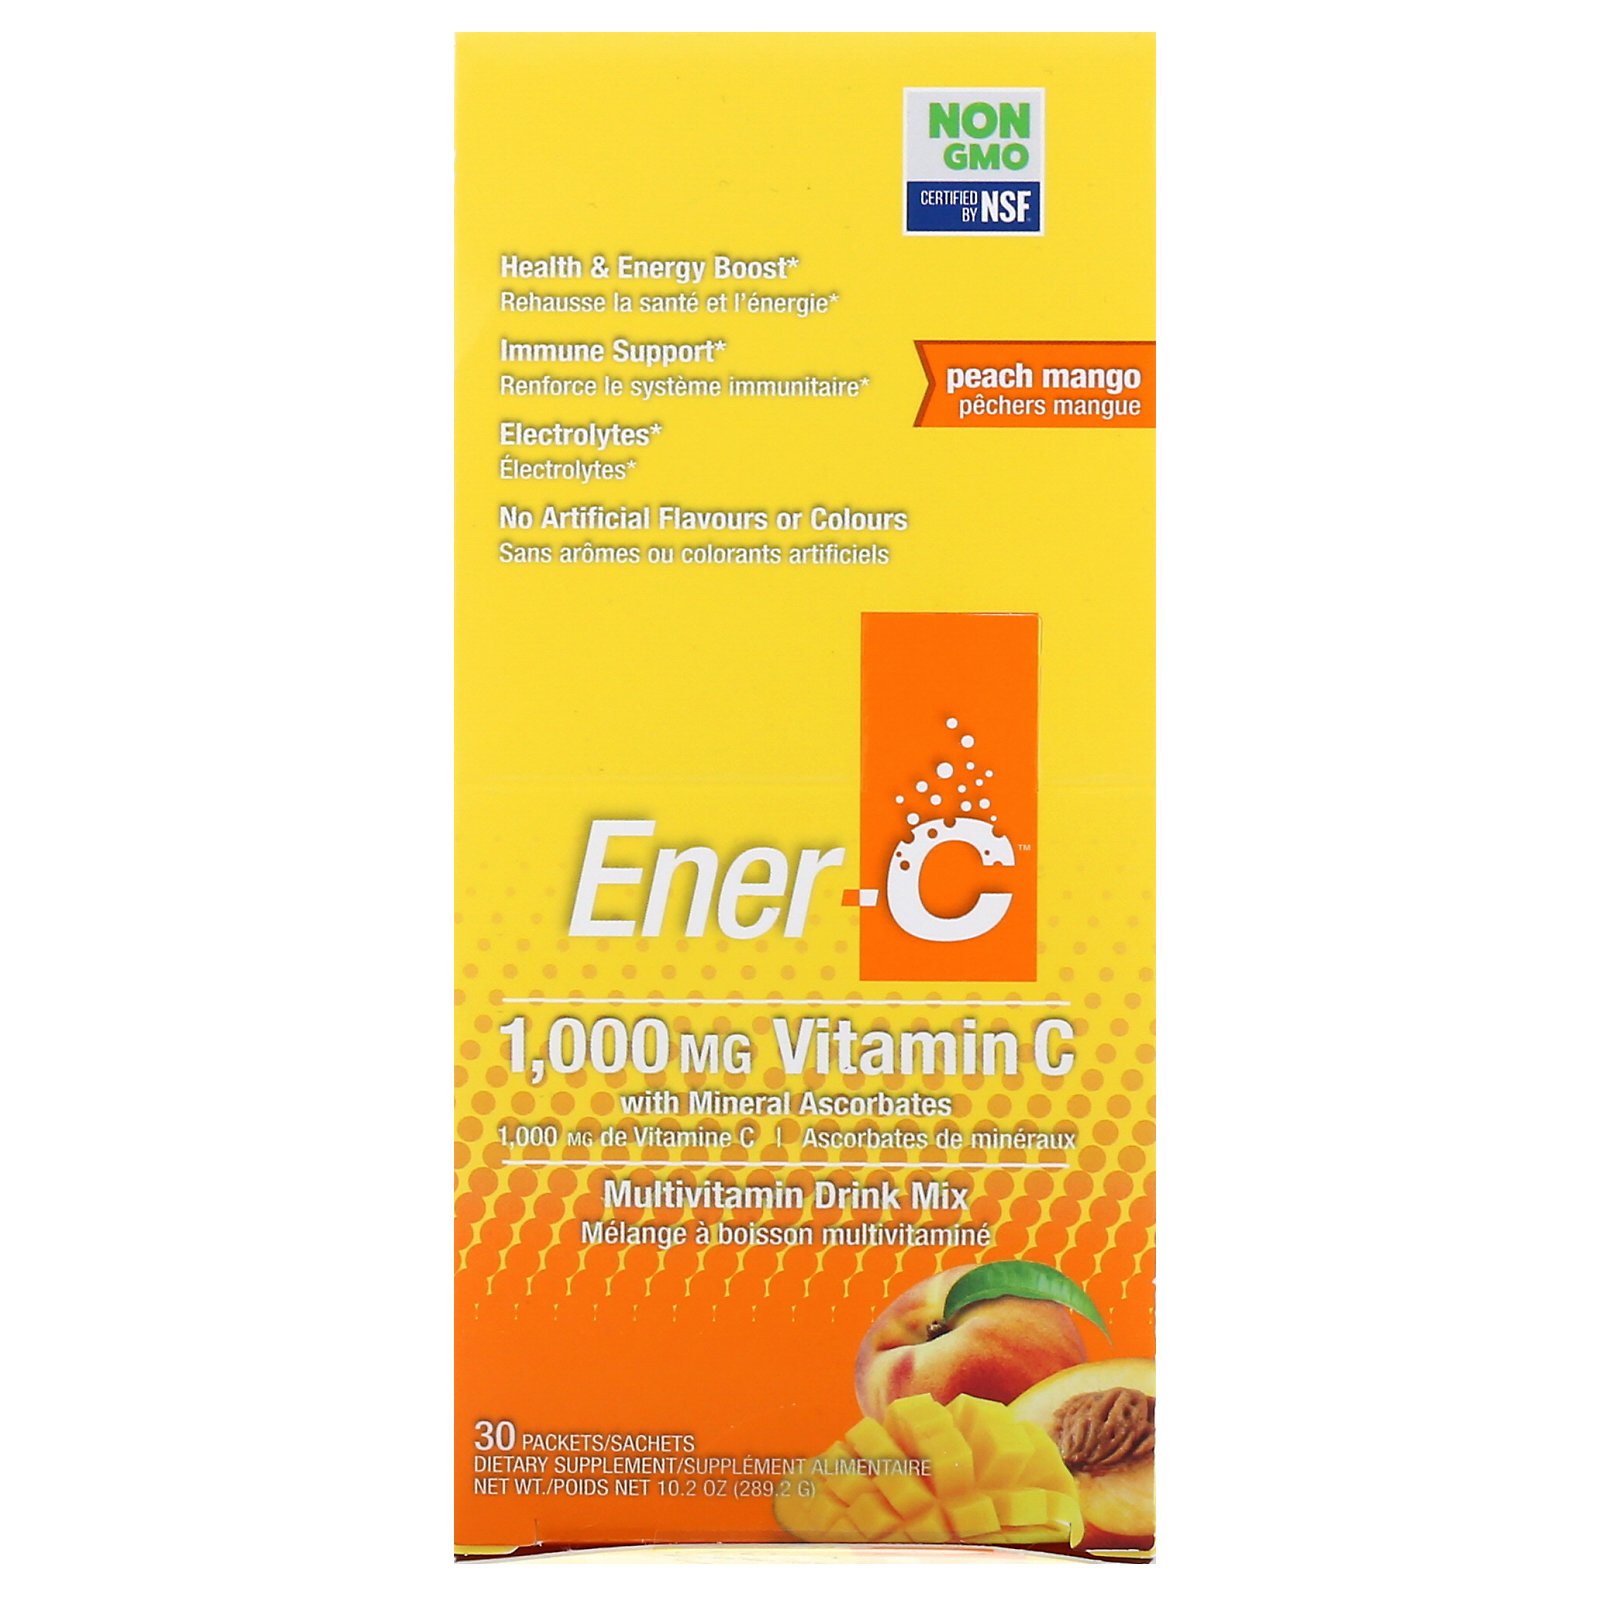 Ener-C Peach Mango 30 Packets by Ener-C Vitamins And Minerals